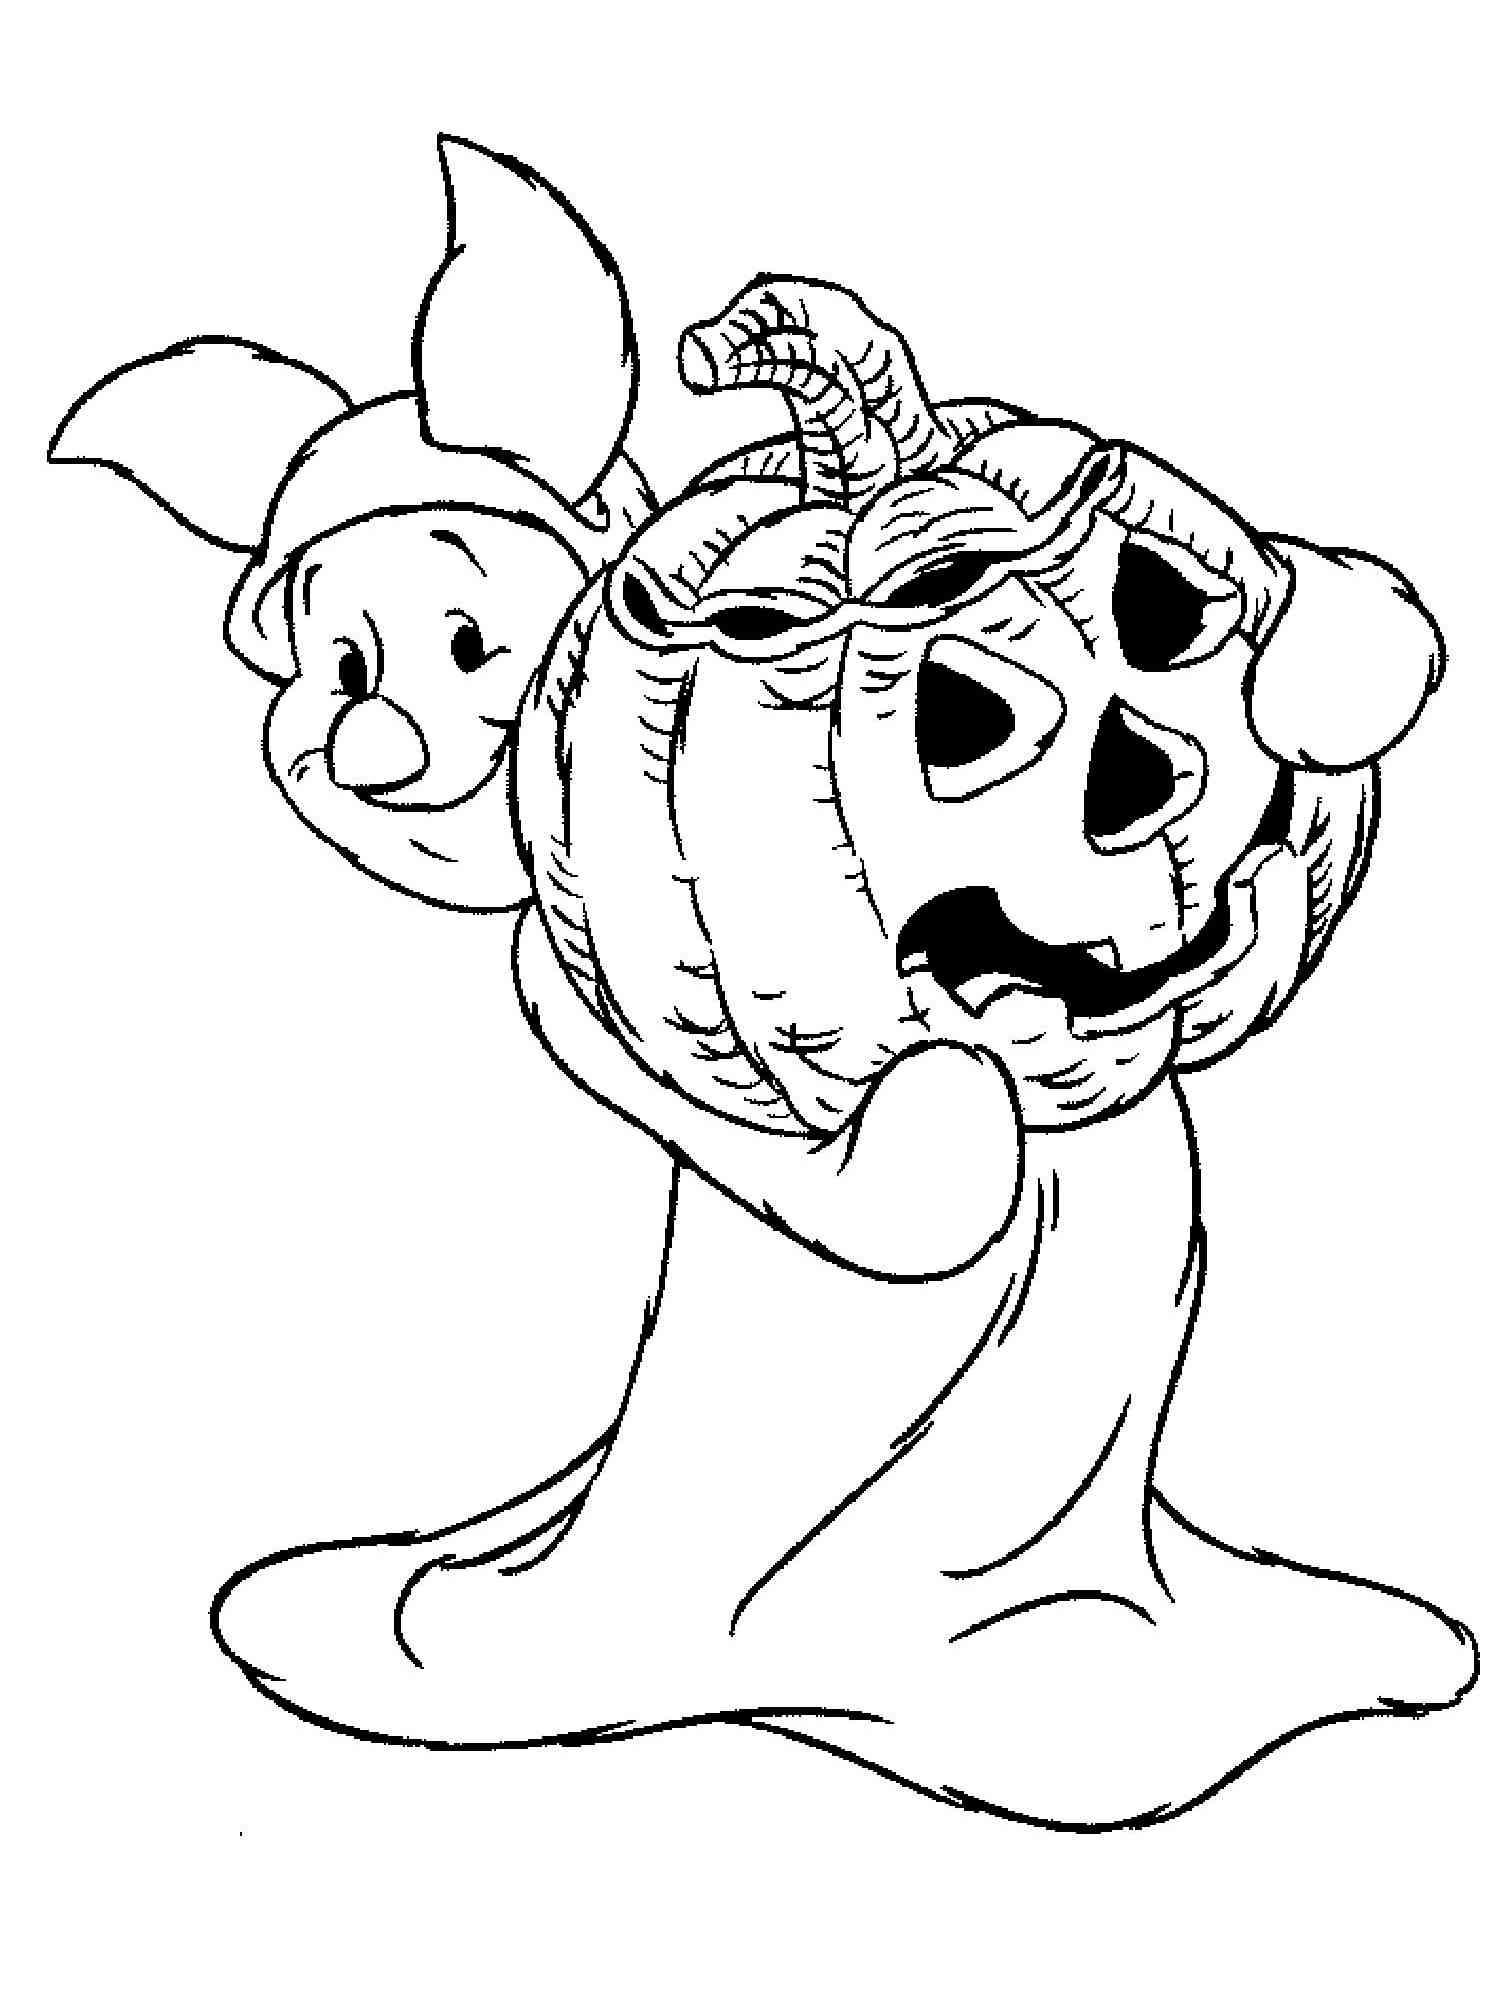 Disney Halloween 28 coloring page